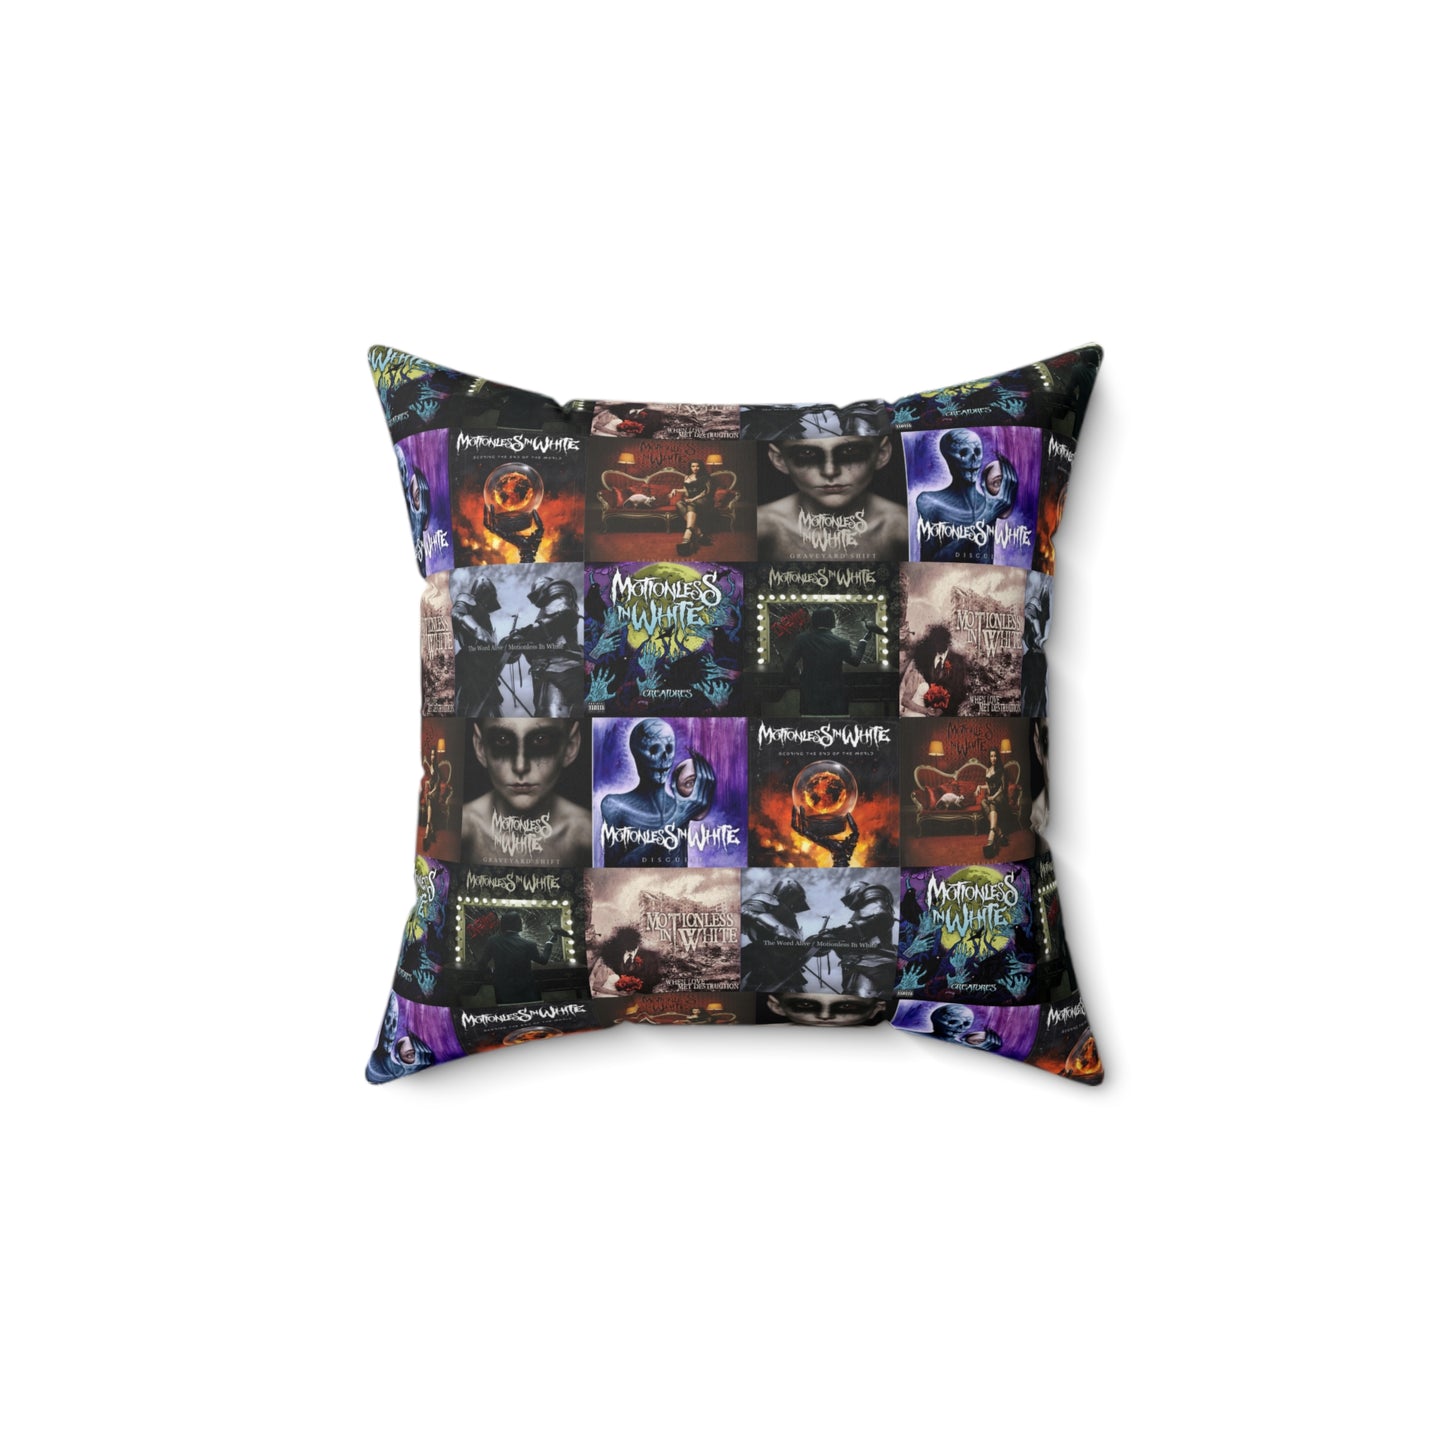 Motionless In White Album Cover Collage Spun Polyester Square Pillow